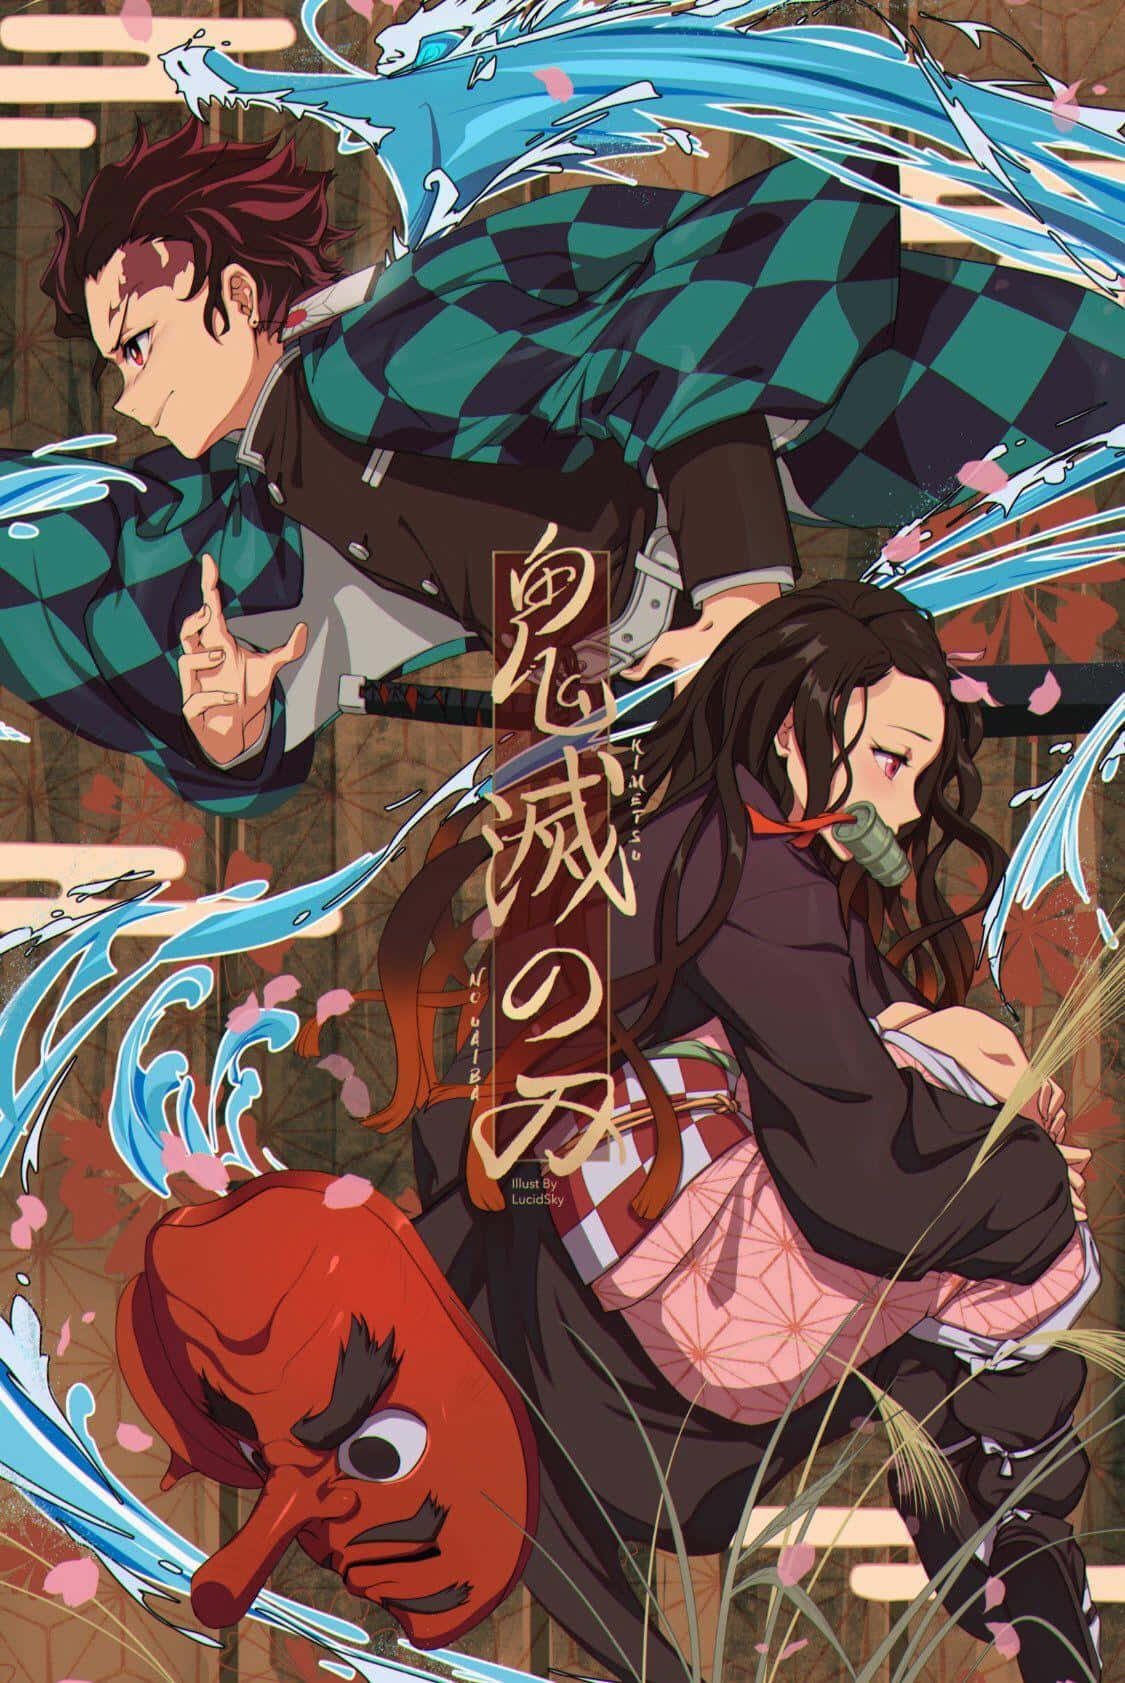 Follow Demon Slayer Tanjiro And Nezuko As They Take On A World Of Powerful And Mysterious Monsters